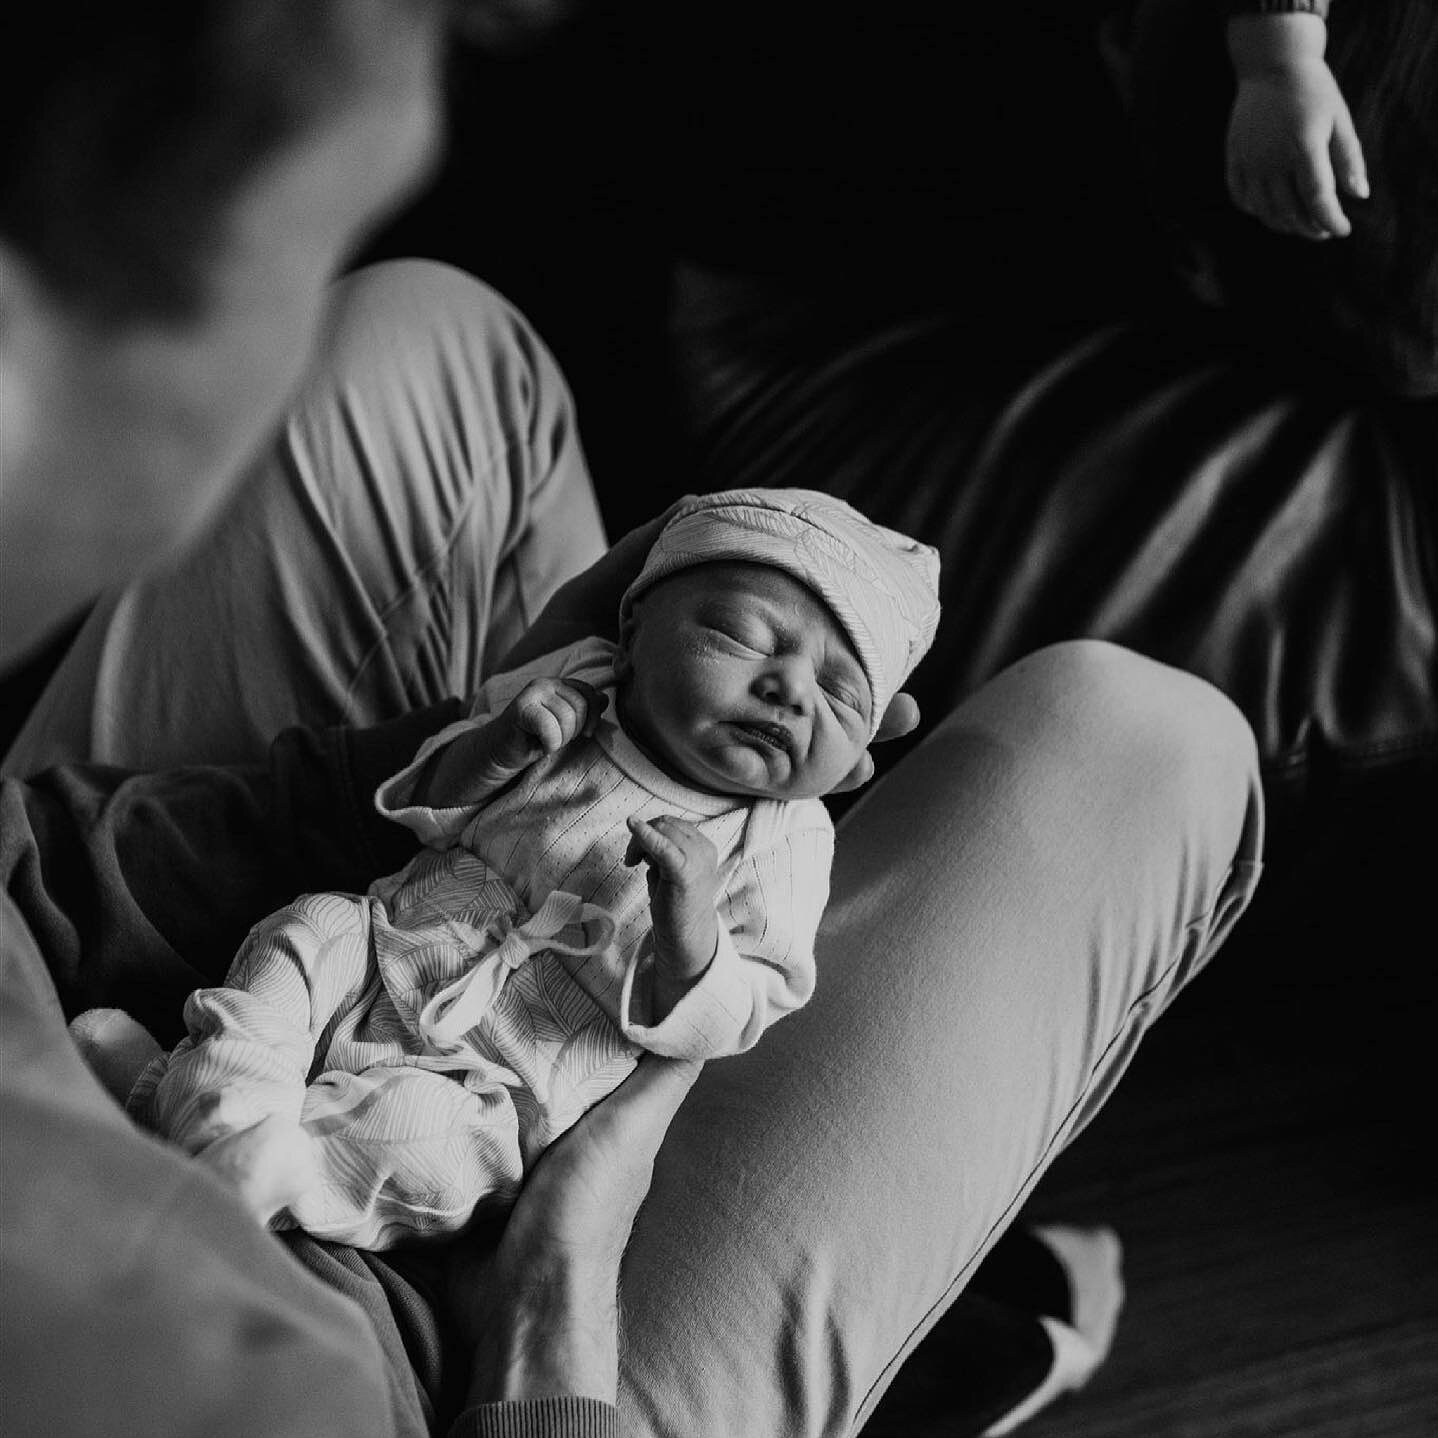 In a few weeks, I get to do this all again - third babe for @alexandralea.mowat and @lucasmowat and the third little darling I get to document joining their family. What a gift!